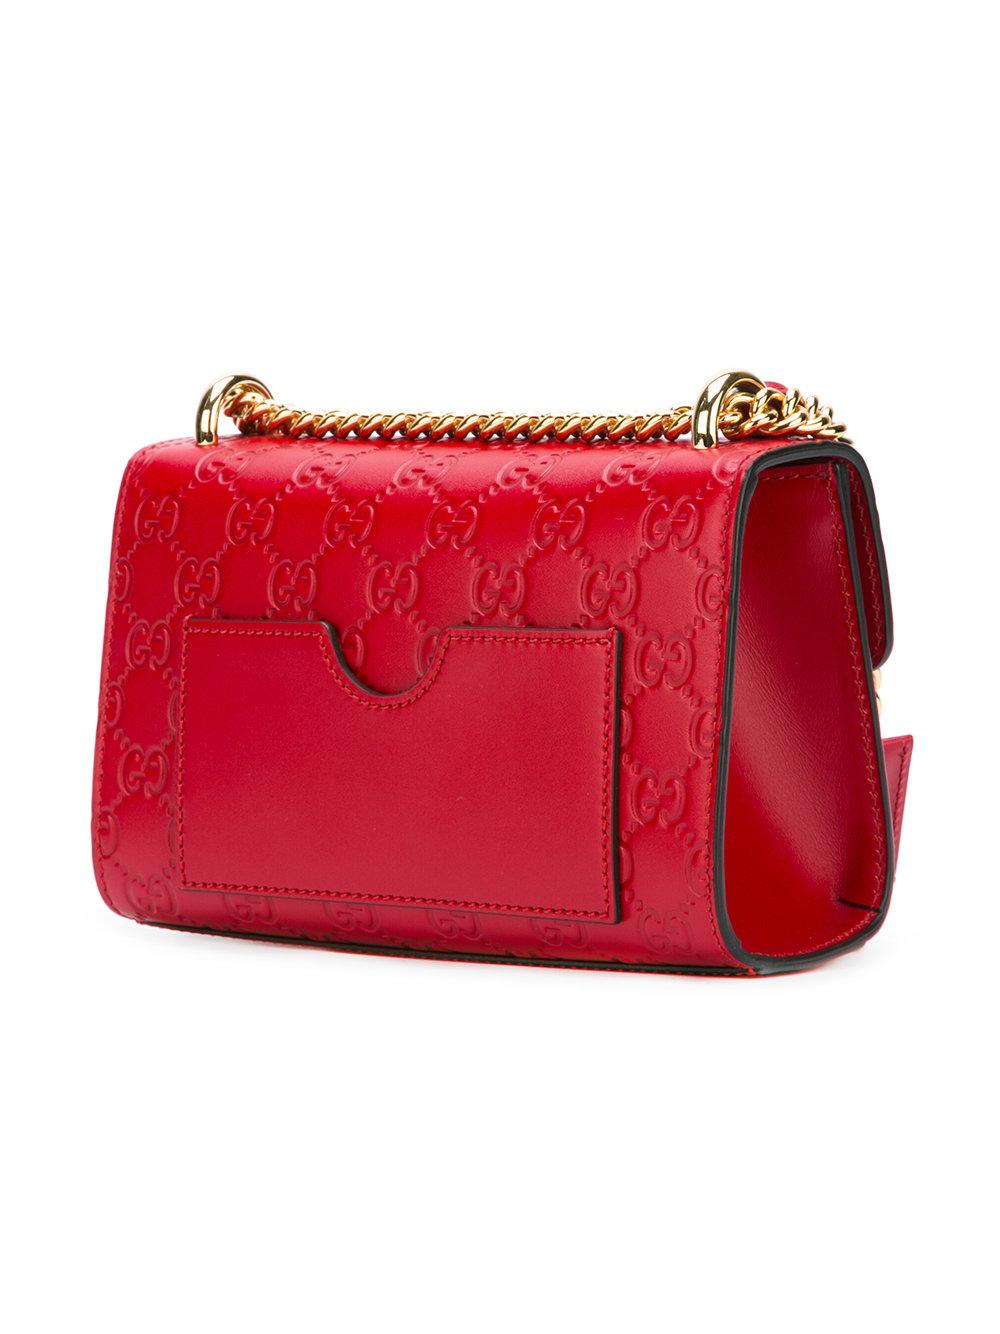 Lyst - Gucci - Padlock Signature Shoulder Bag - Women - Calf Leather - One Size in Red